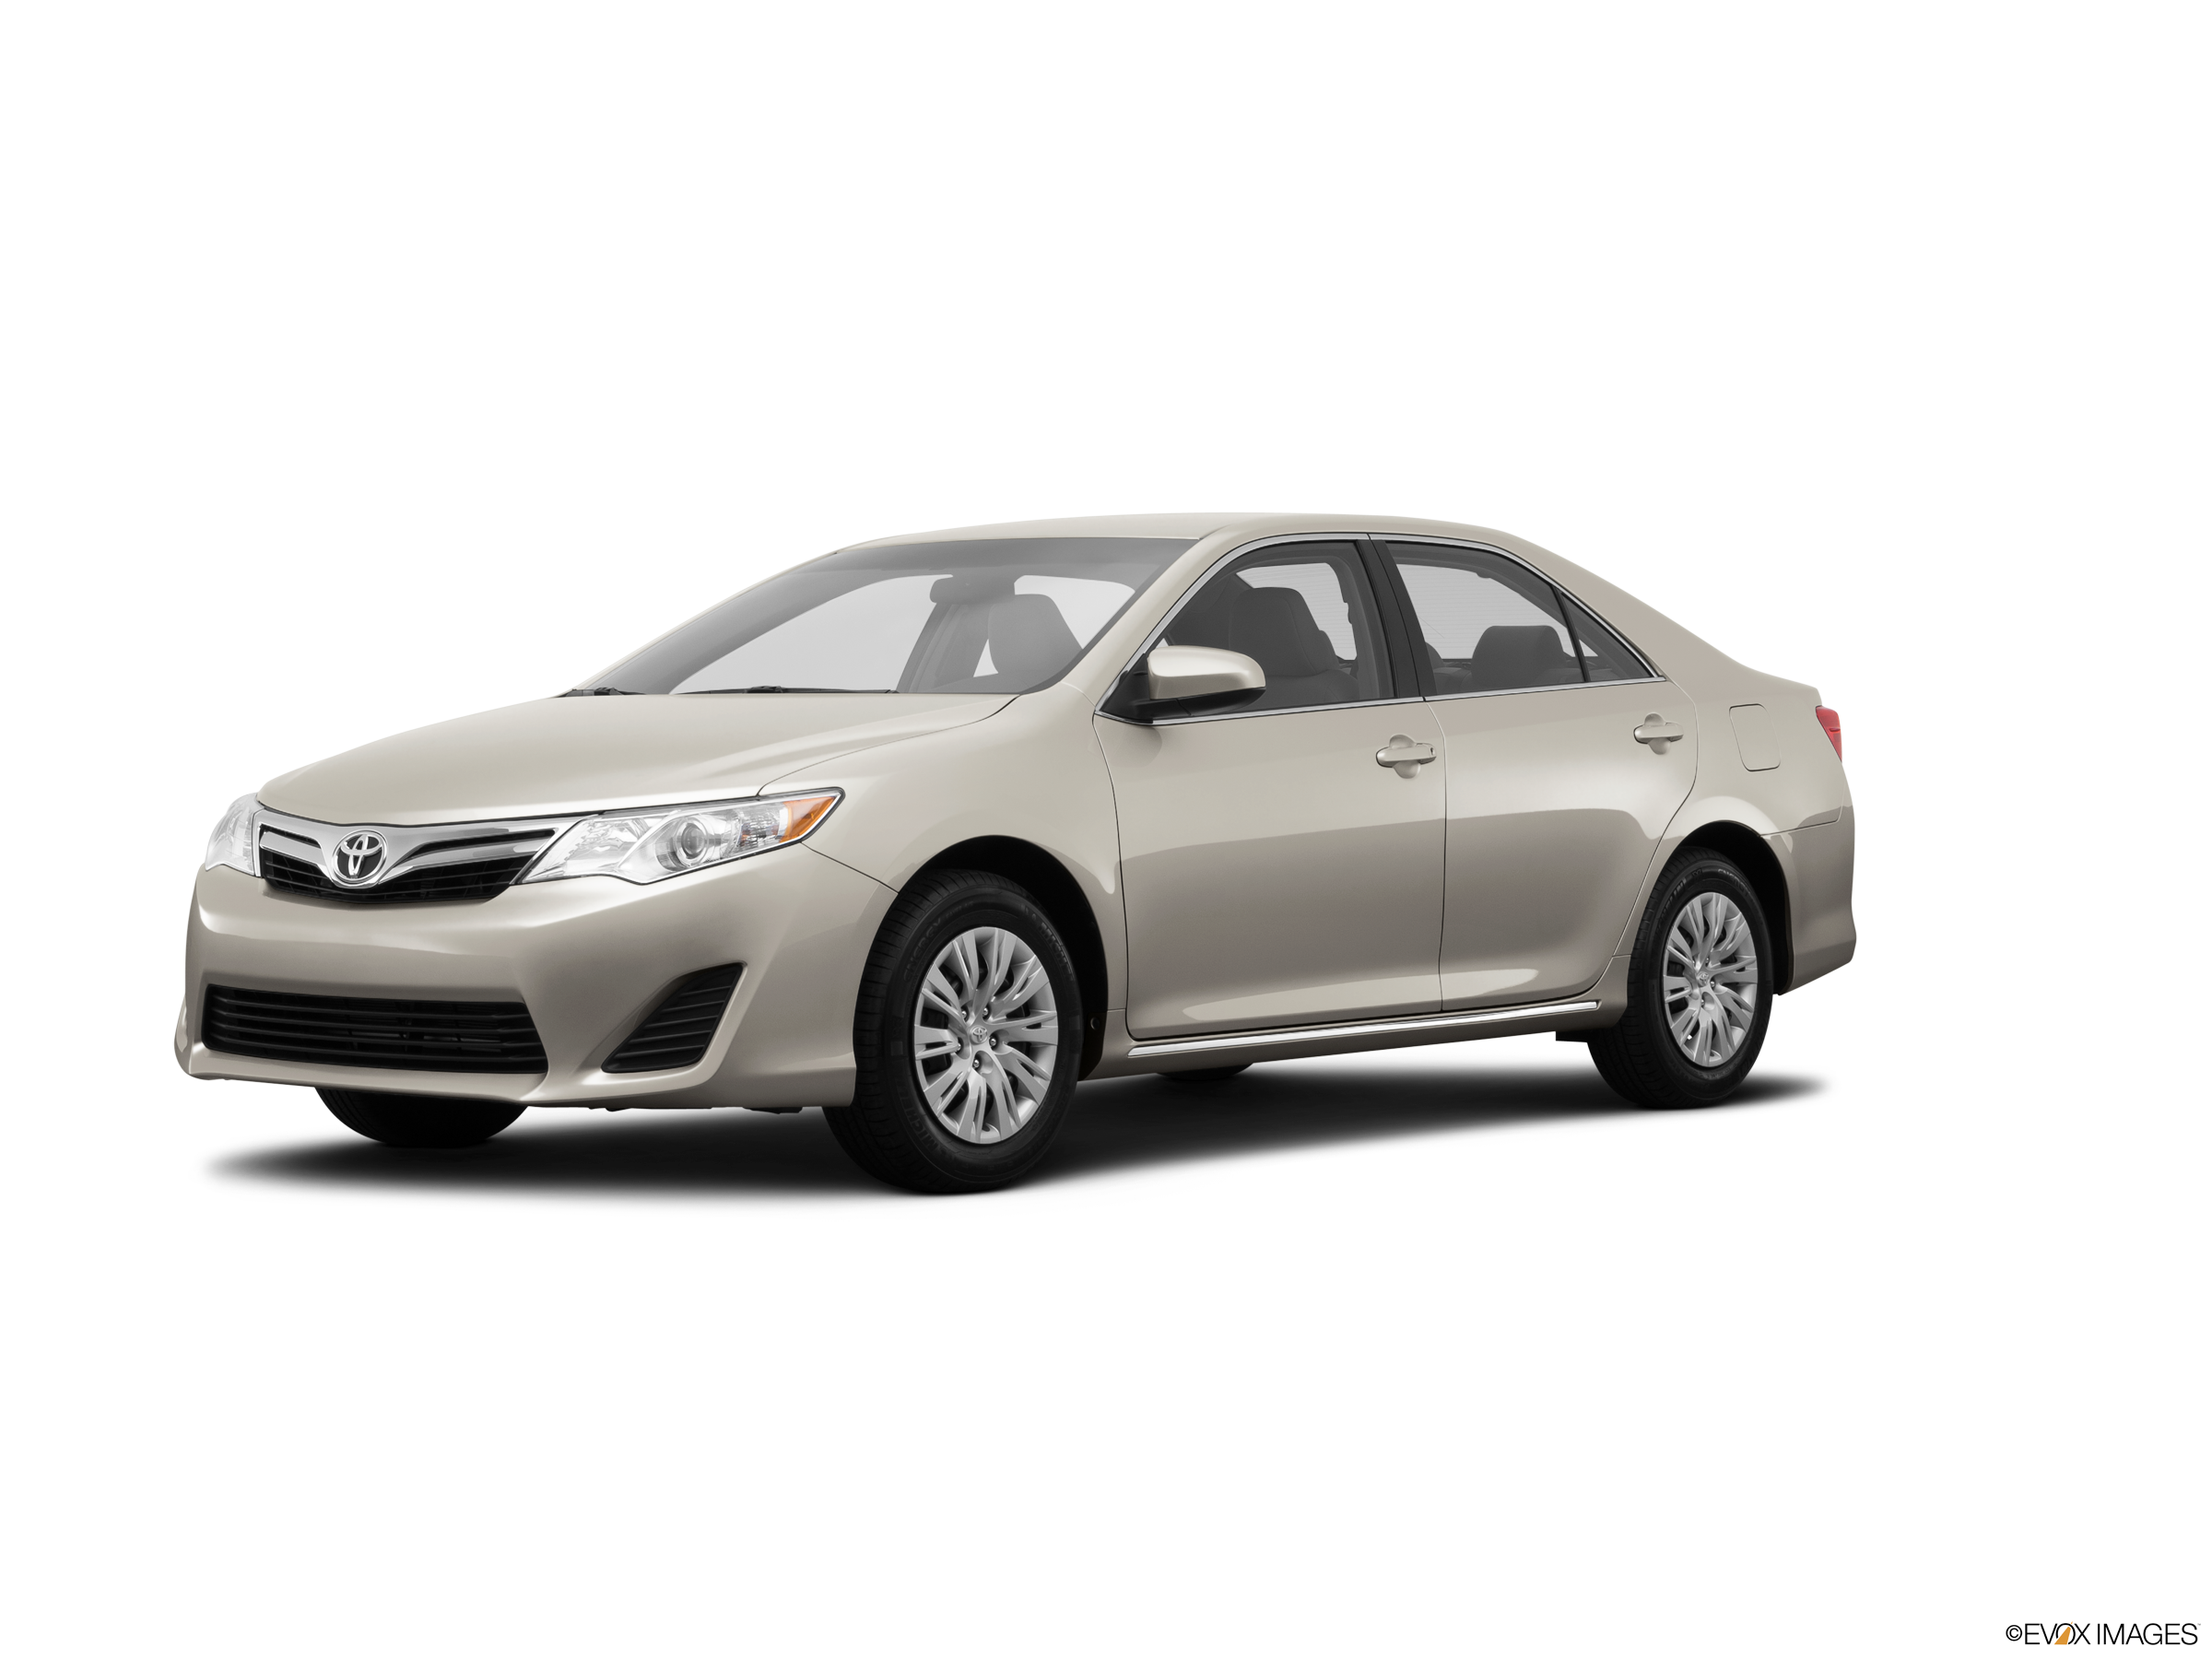 Spoiler Alert Toyota Camry Hybrid Lineup Adds SE Limited Edition for  20145 Model Year  Toyota USA Newsroom